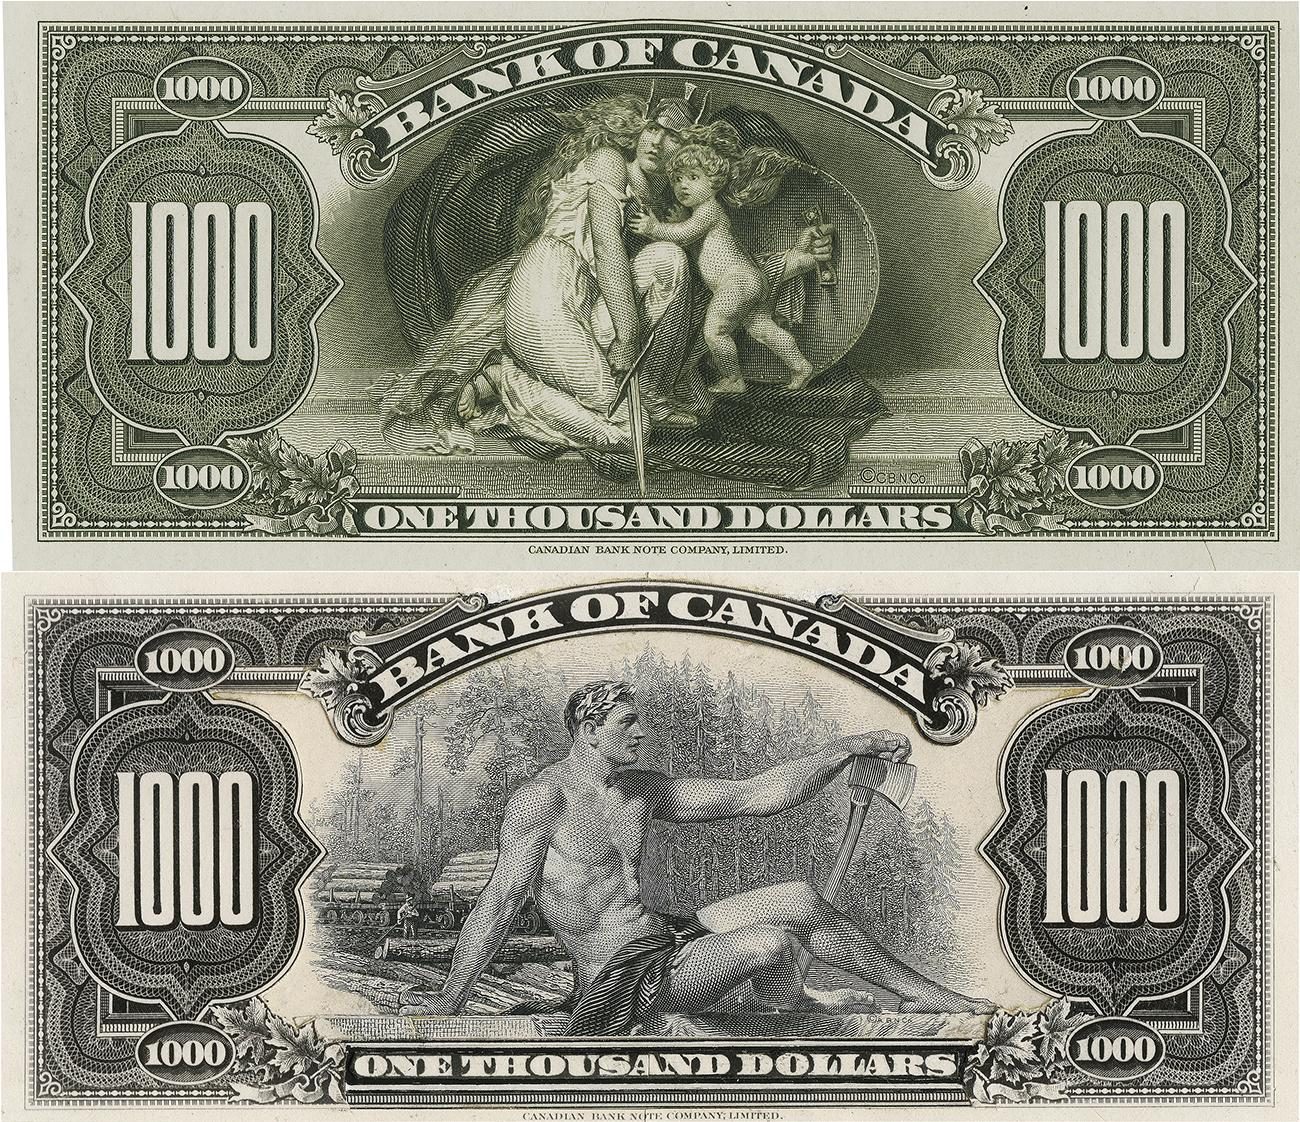 Bank notes, 2, top, semi-nude man with an axe in a forest scene; bottom, woman with sword, shield and baby.